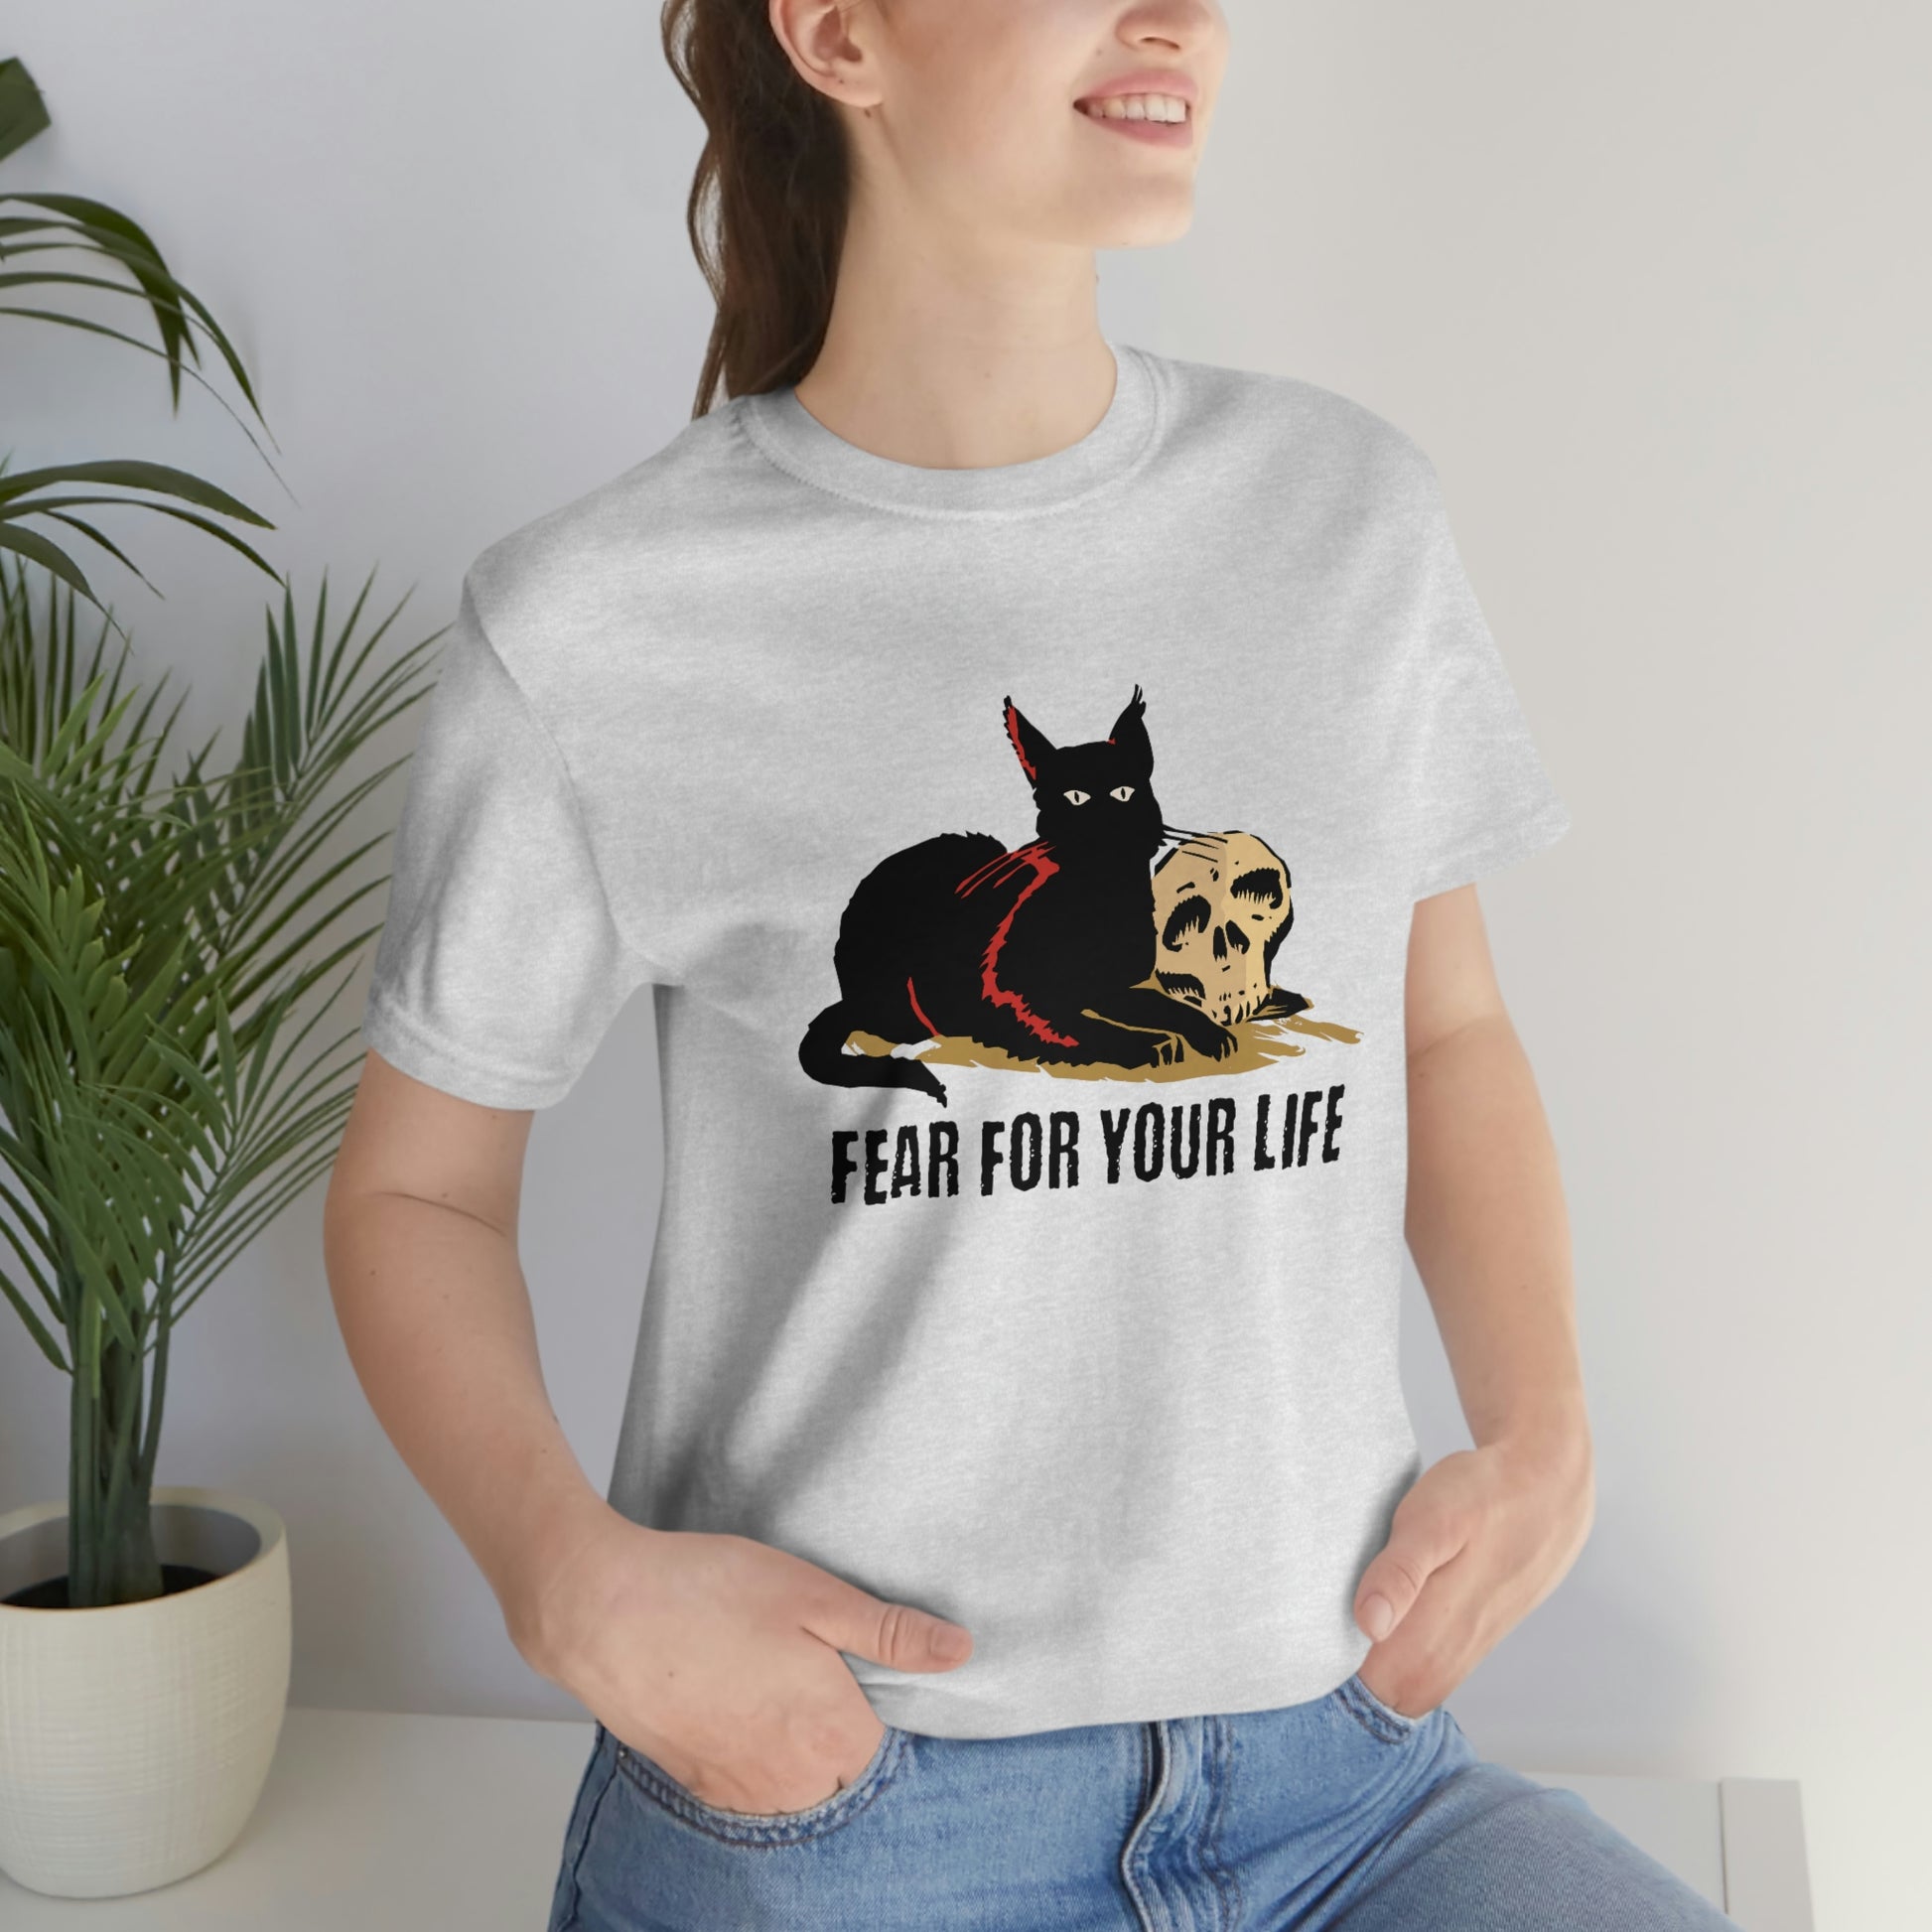 Black cat says fear for your life t shirt, funny black cat shirt, sarcastic cat tshirt, creepy cat tee, Spooky shirt, funny cat themed shirt